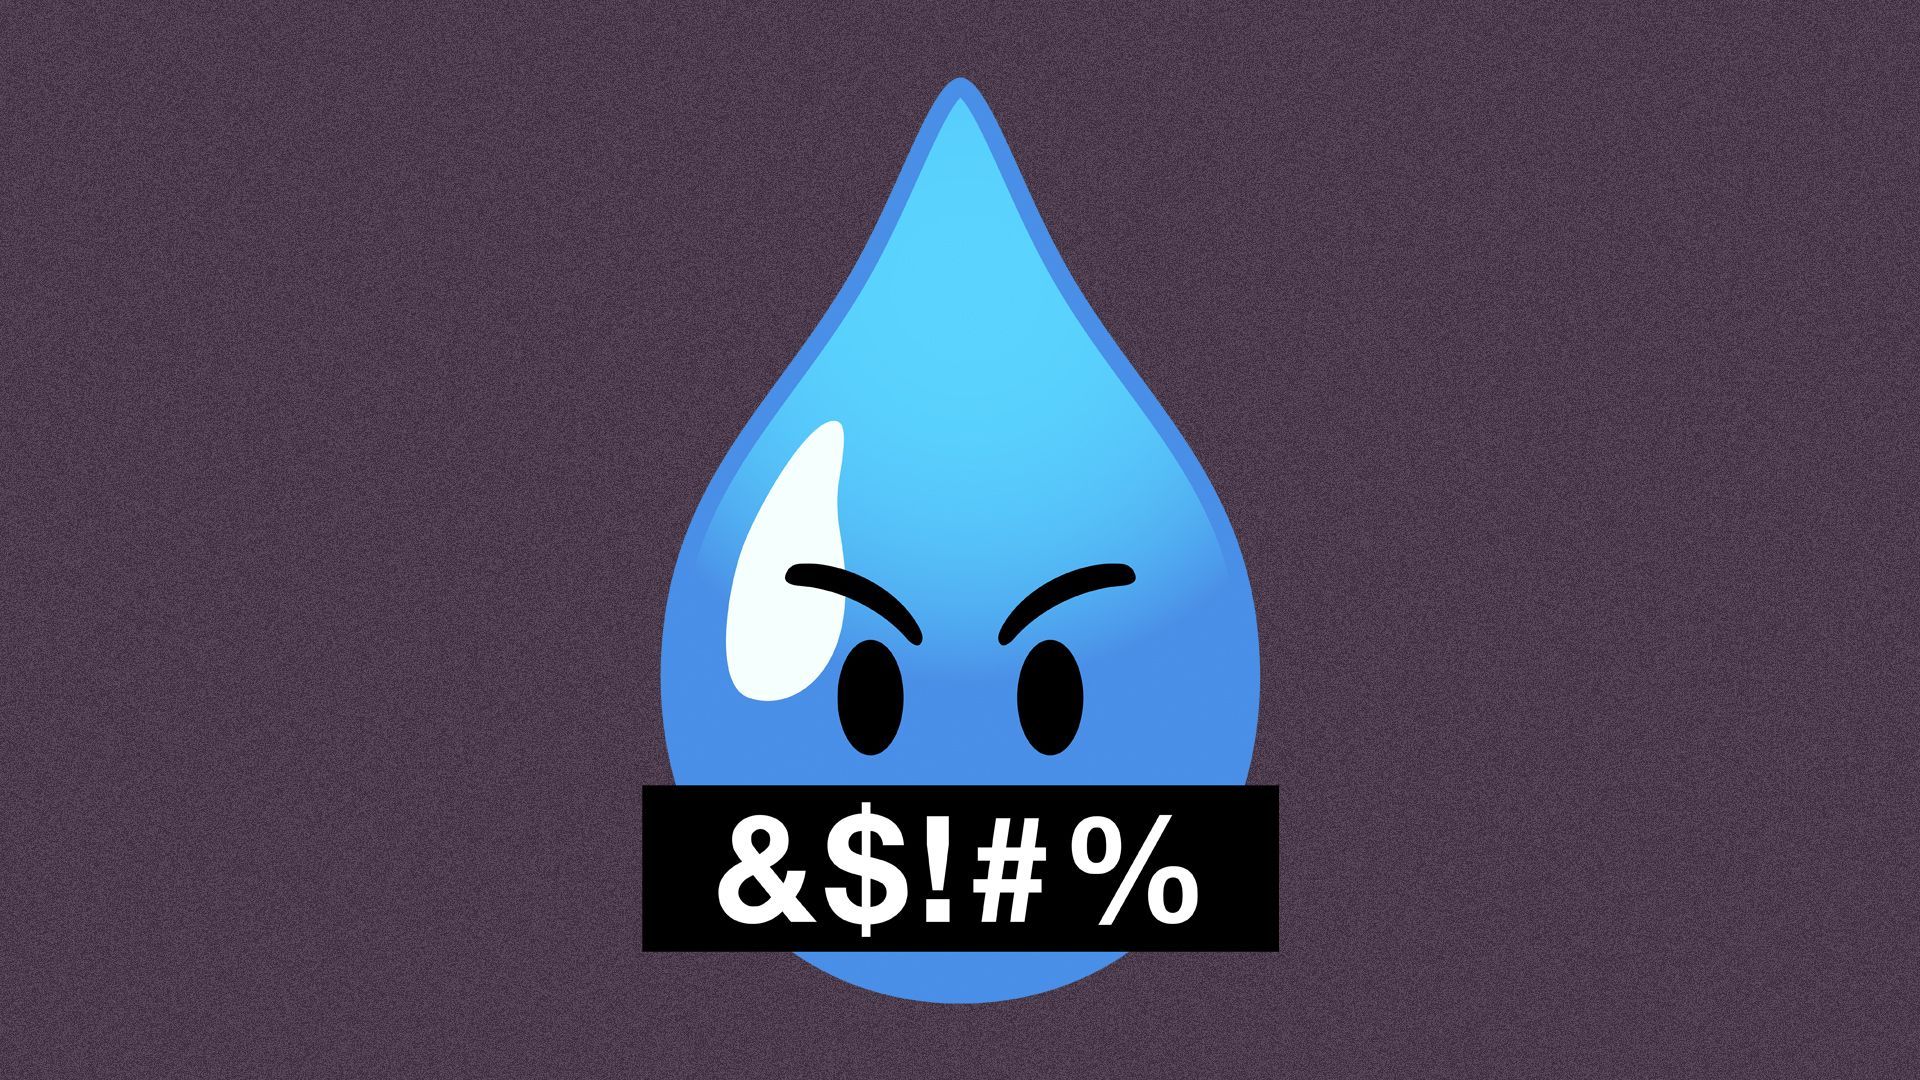 Illustration of a water drop emoji mixed with a swearing face emoji.